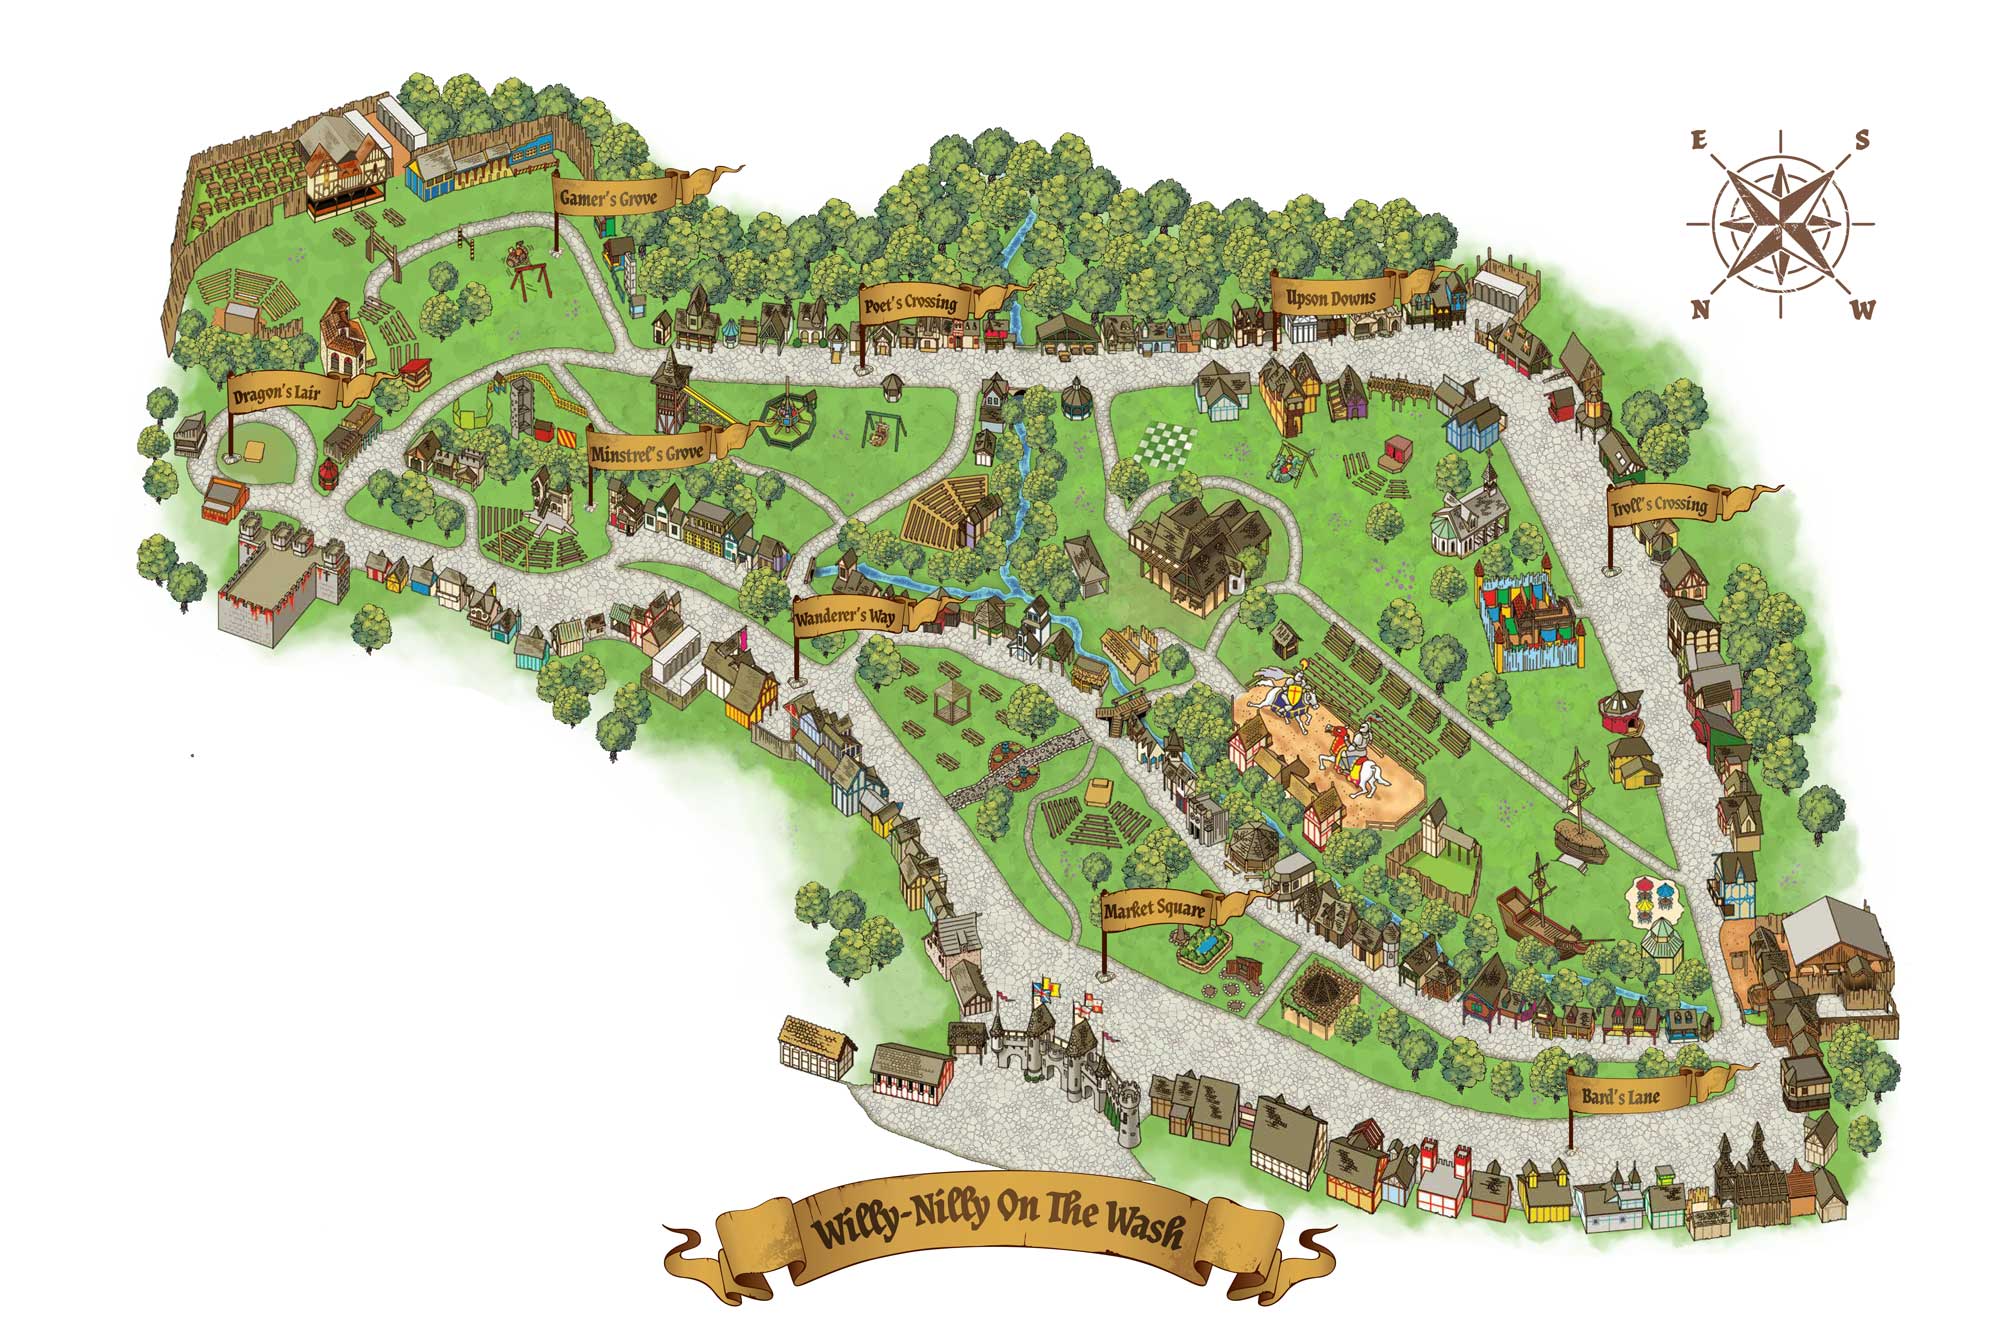 festival grounds map